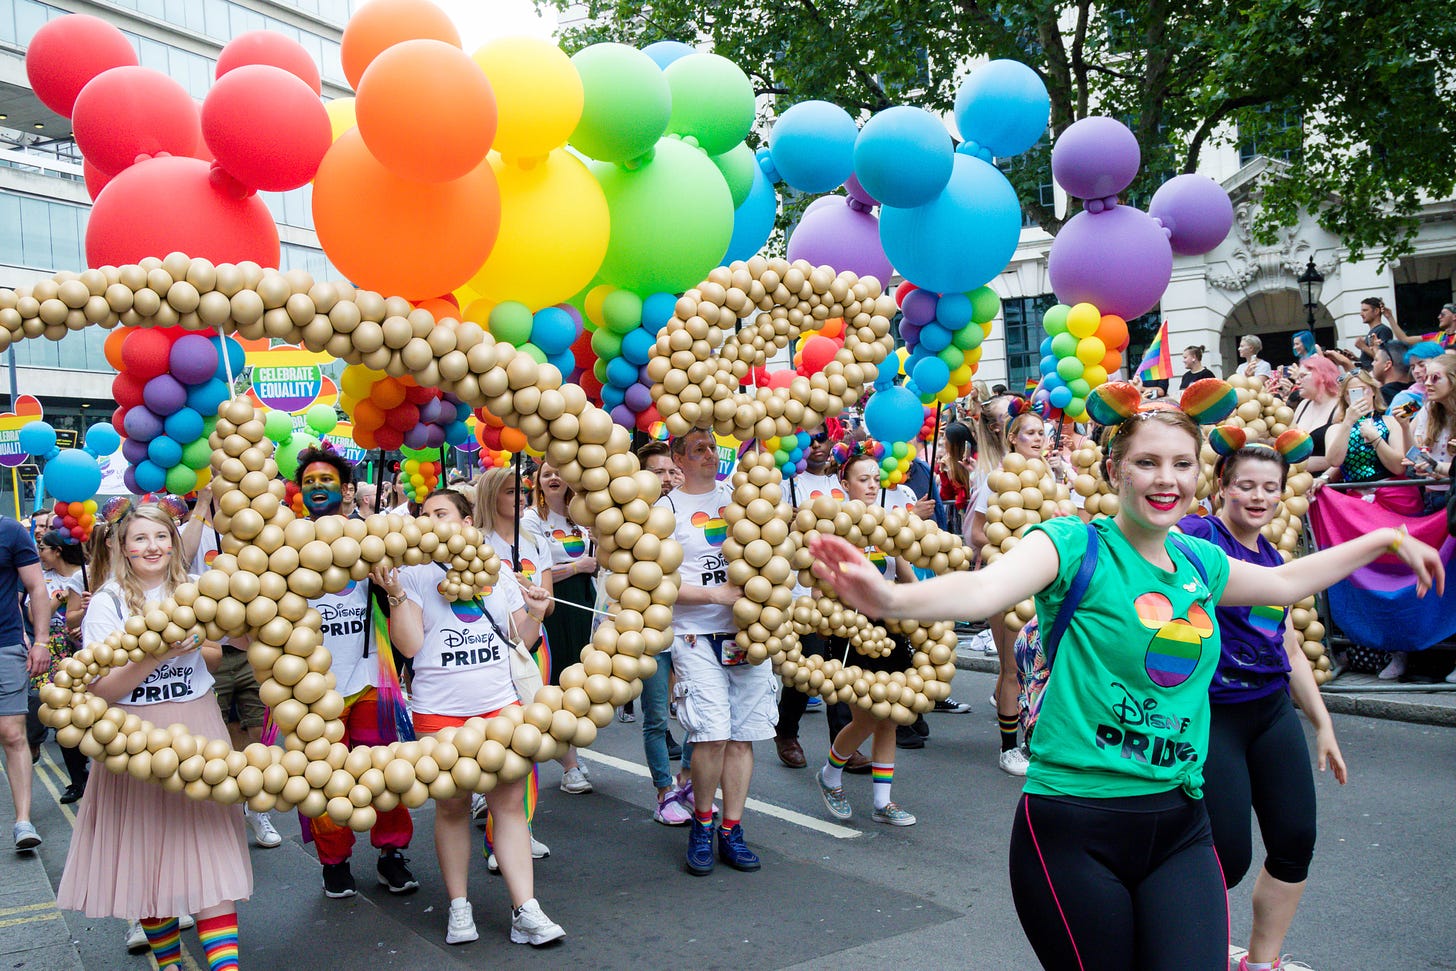 A photo of Disney fans at a pride parade. They are carrying the Disney logo spelled out in gold balloons, and a series of rainbow-colored Mickey Mouse balloons.